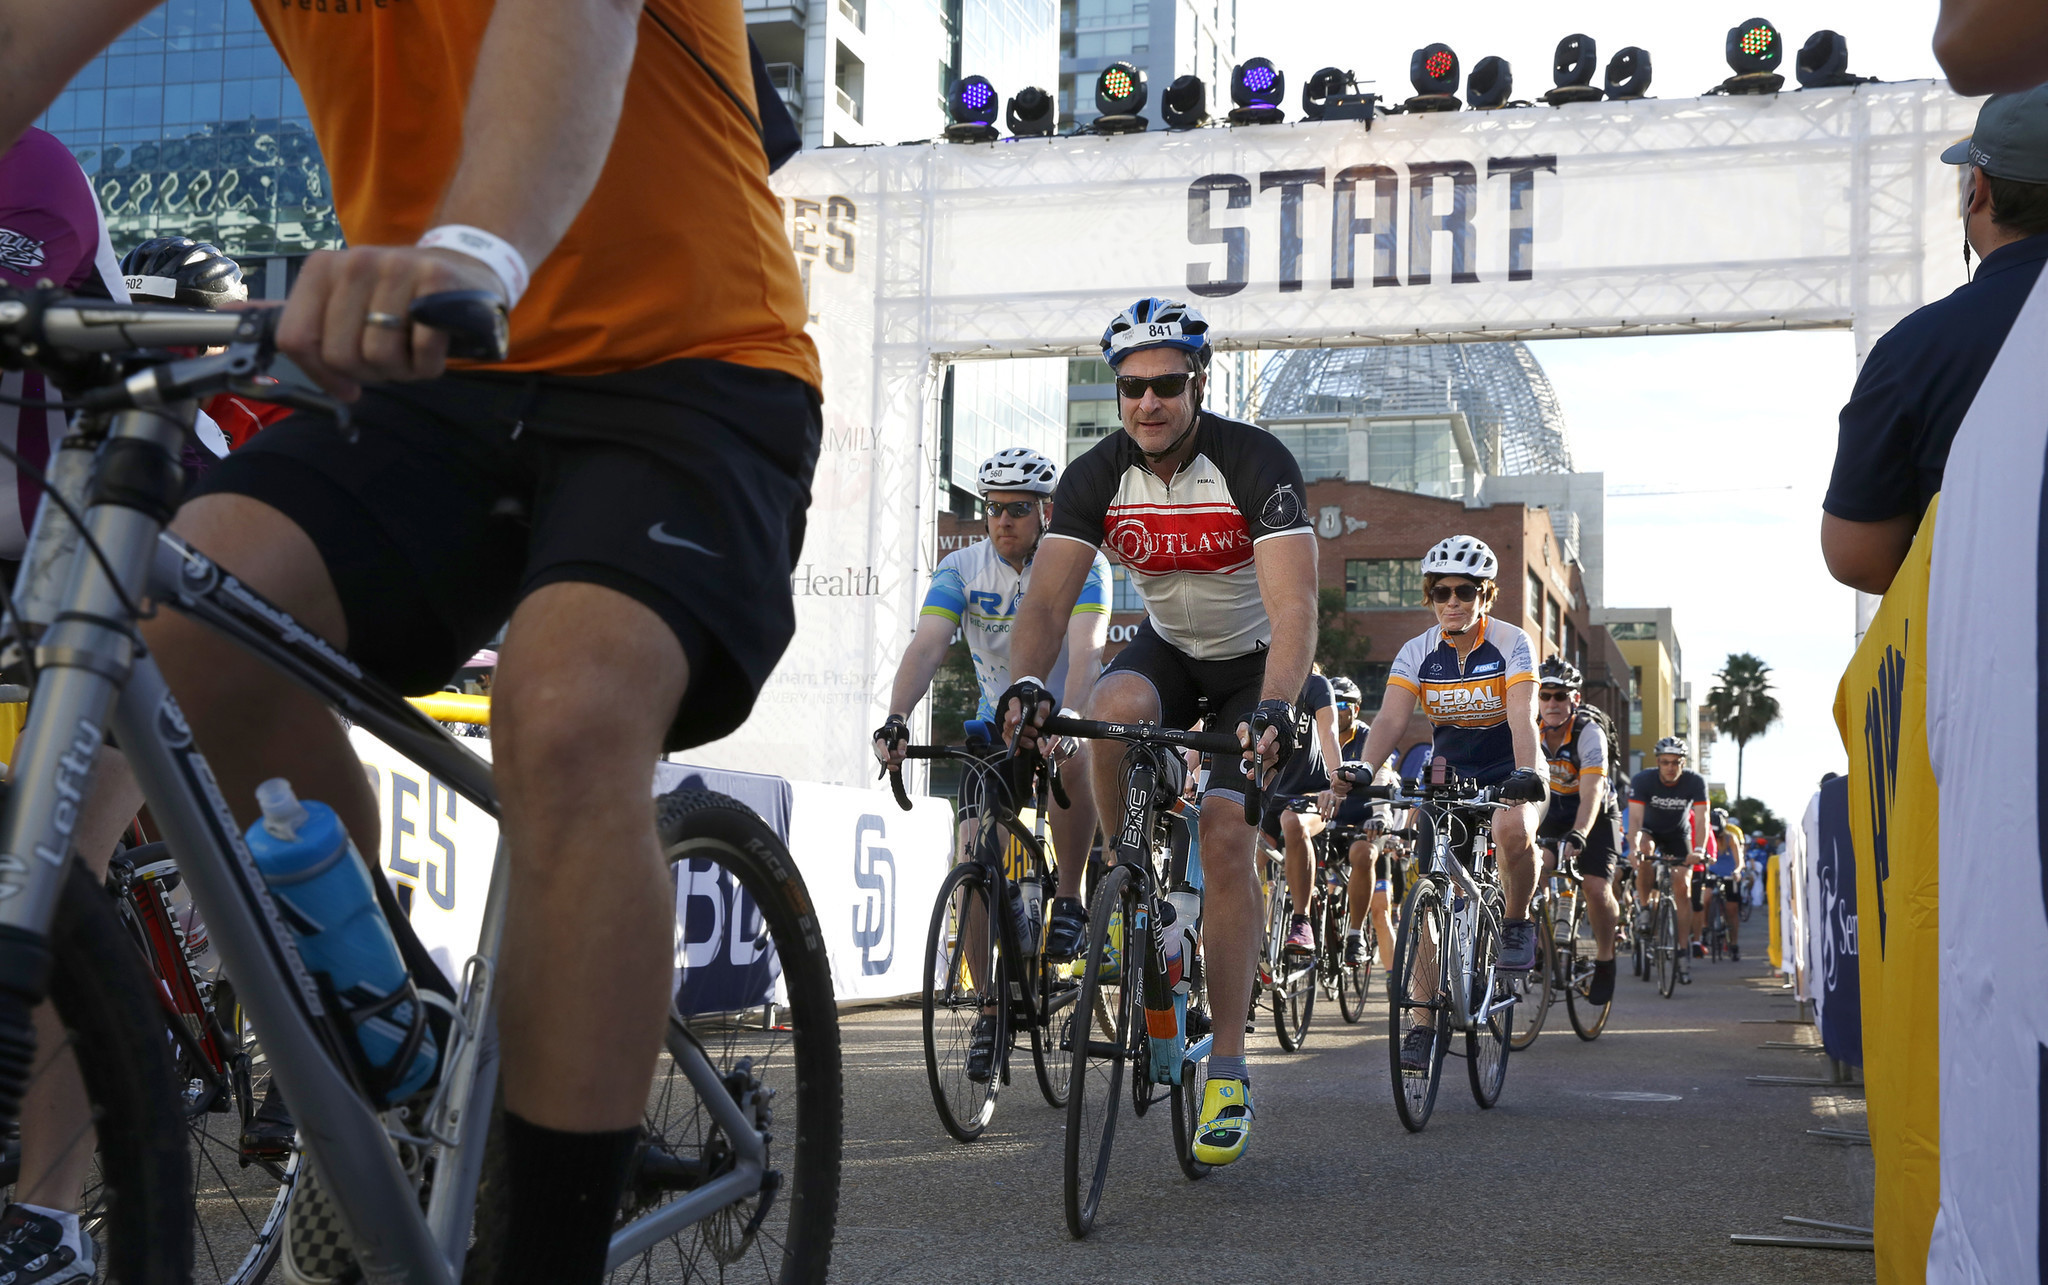 Pedal power event raises $2 million for cancer research